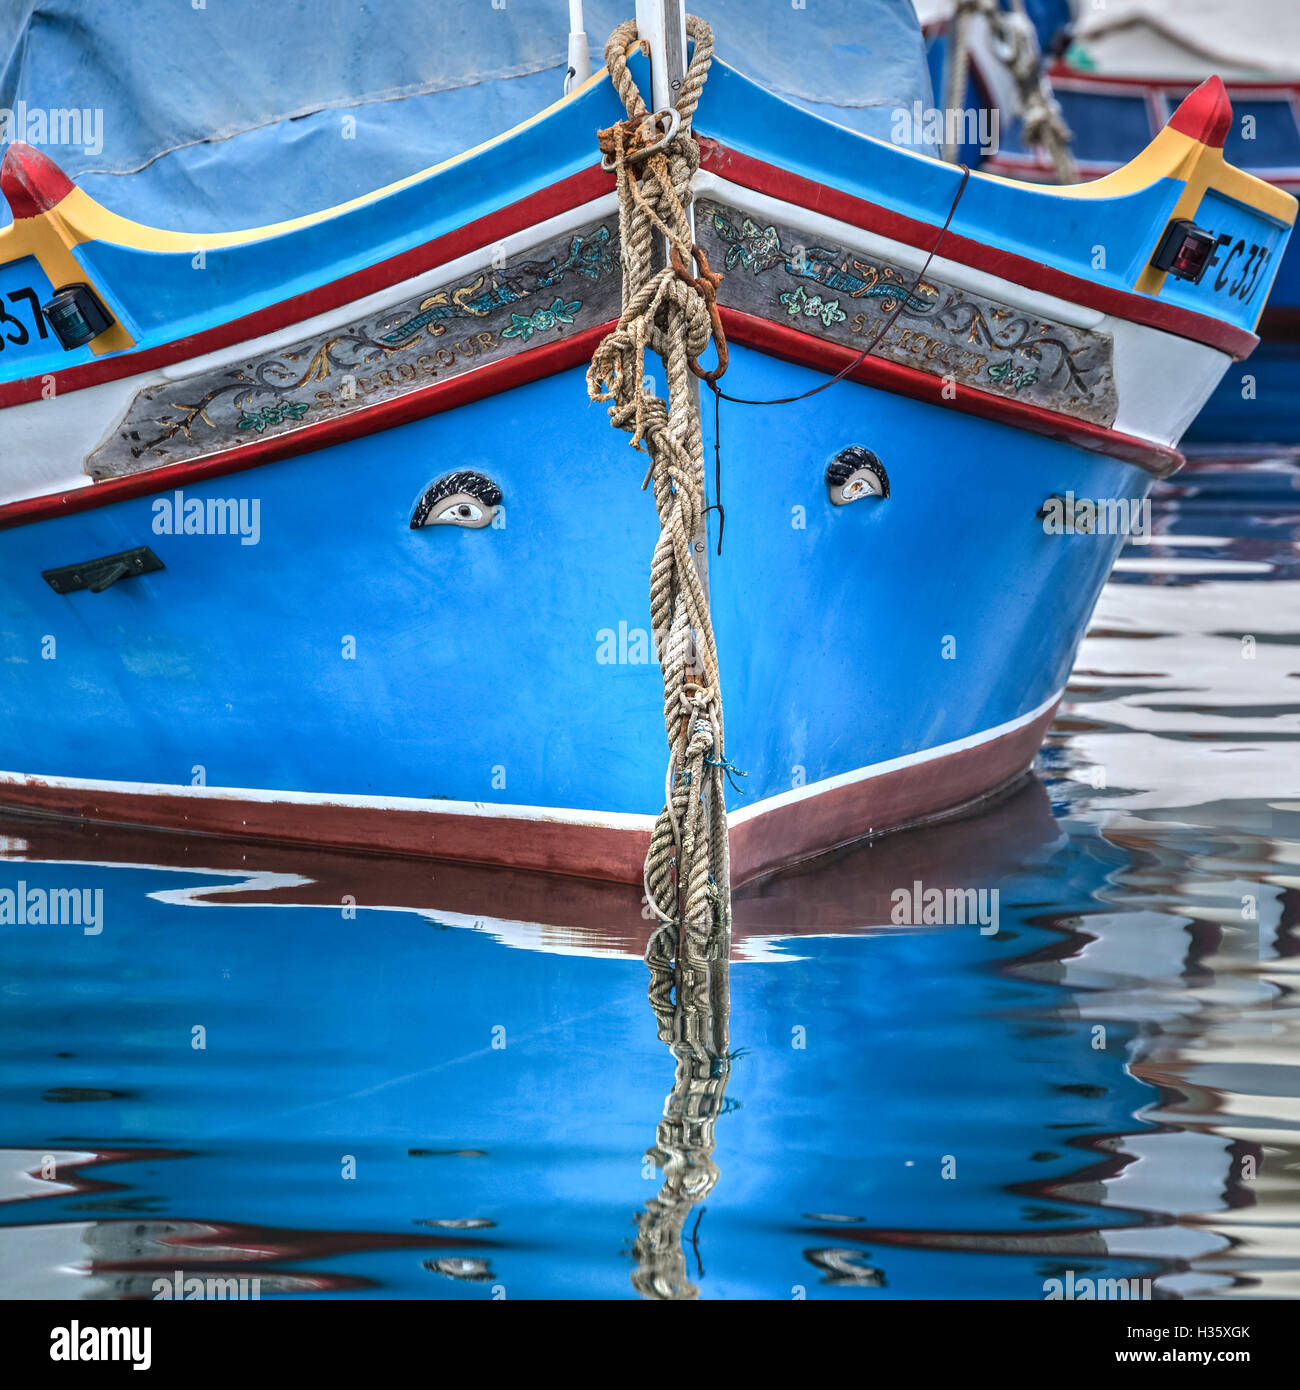 Bow of traditional Maltese fishing boat called Luzzu, with the Eye of Horus or Osiris Stock Photo